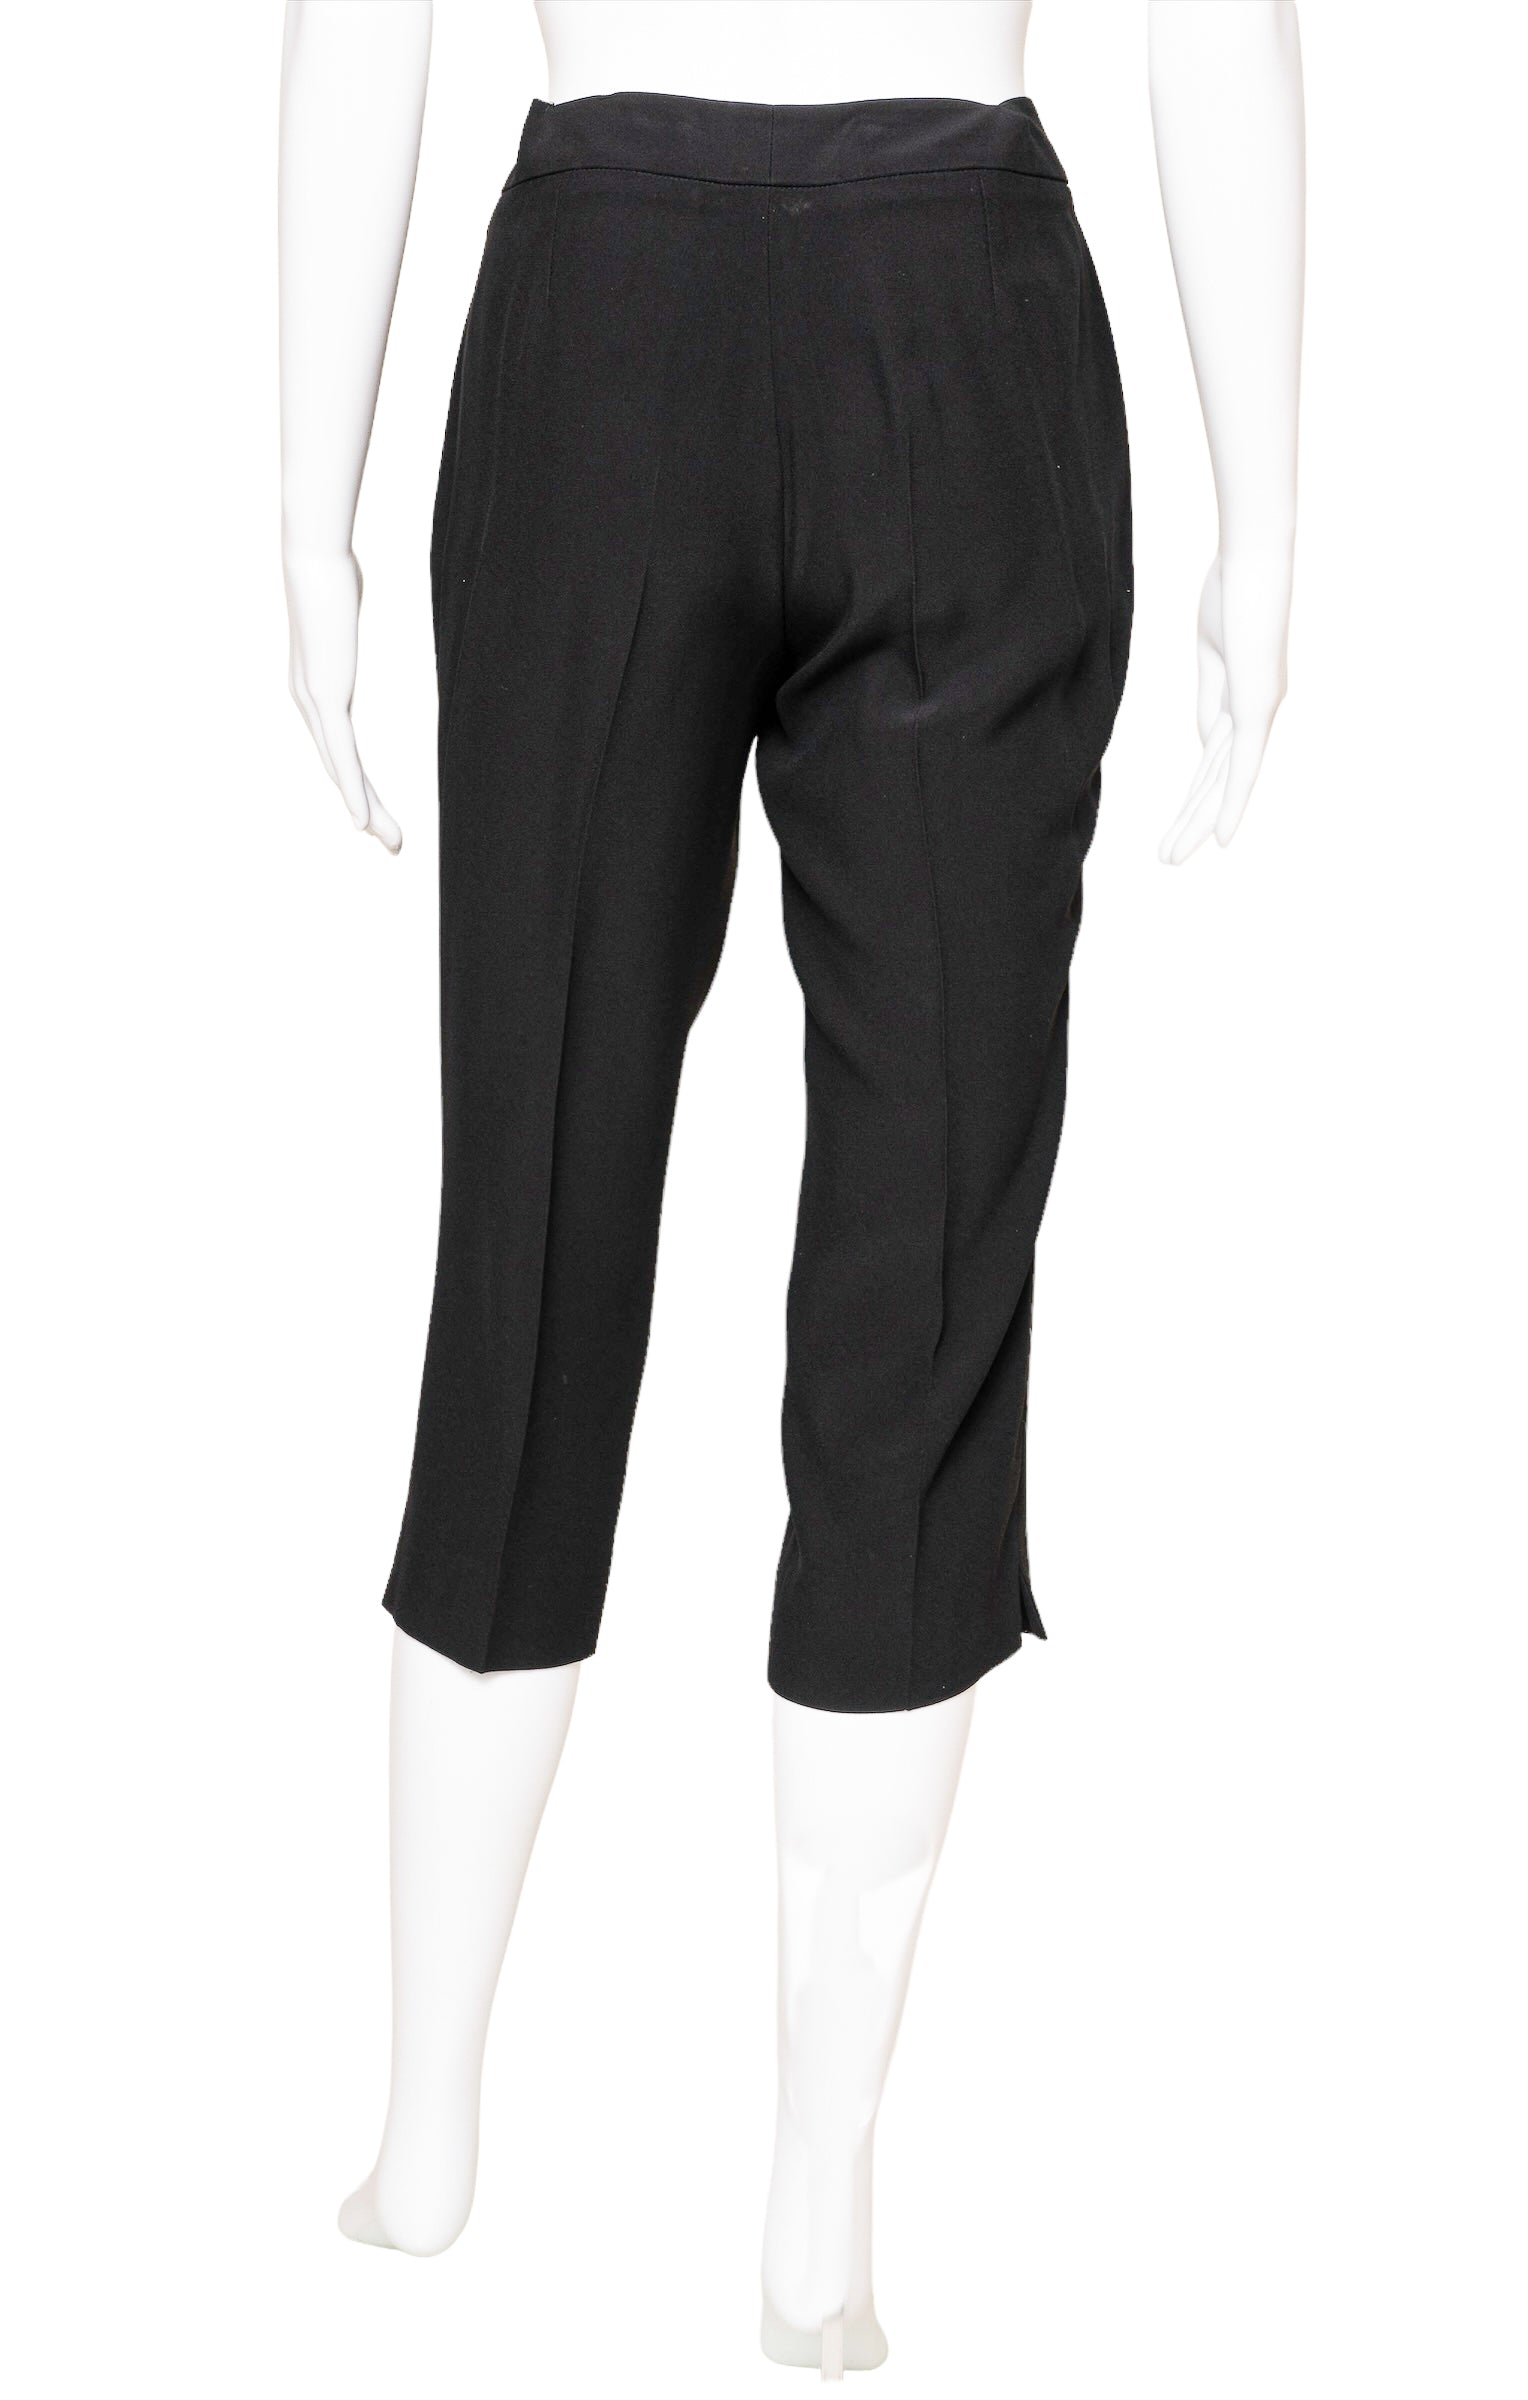 ALEXANDER MCQUEEN Pants Size: IT 40 / Comparable to US 2-4